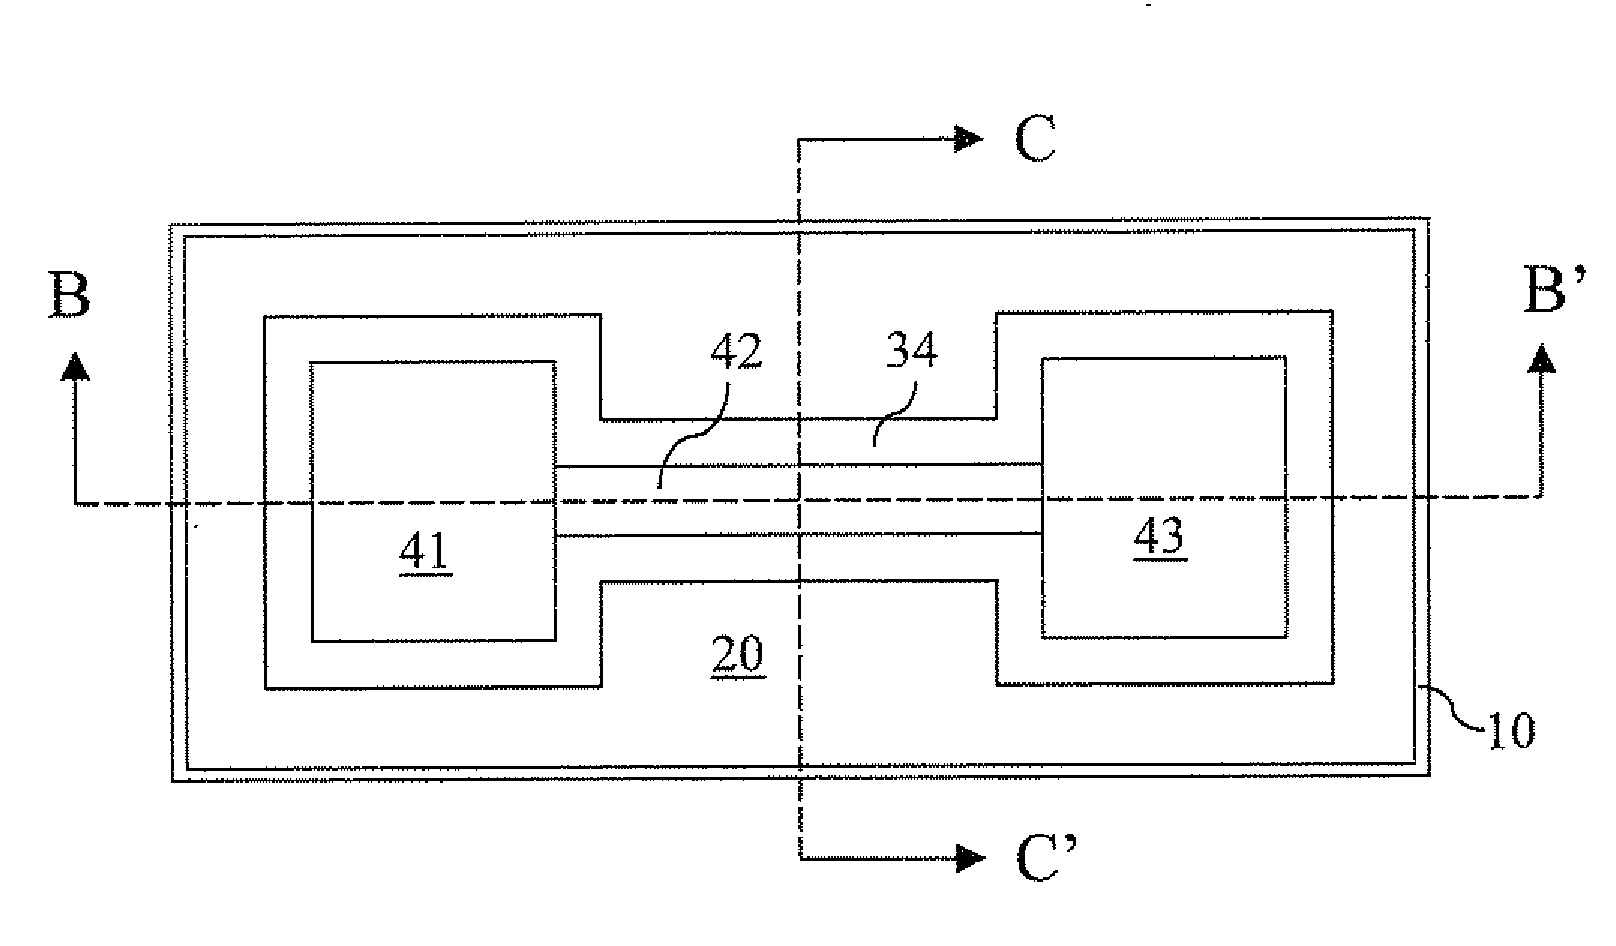 Electrical fuse having a cavity thereupon